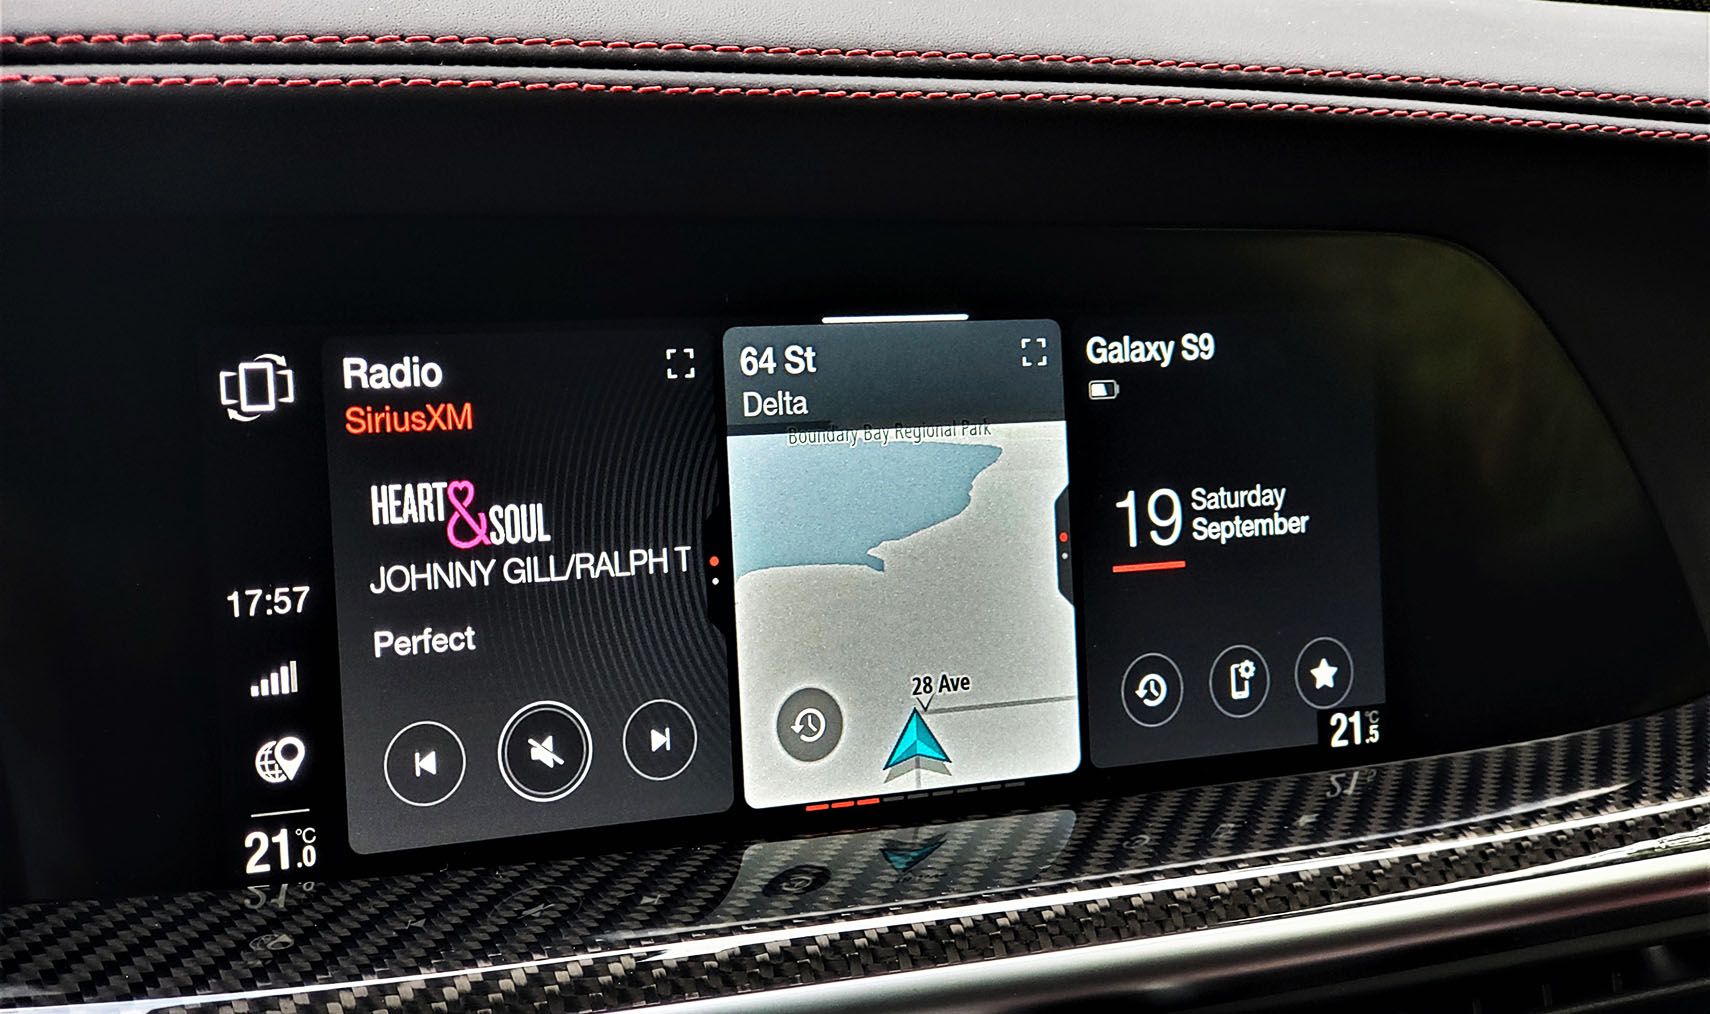 The configurable widget system makes it the infotainment system easy to personalize.